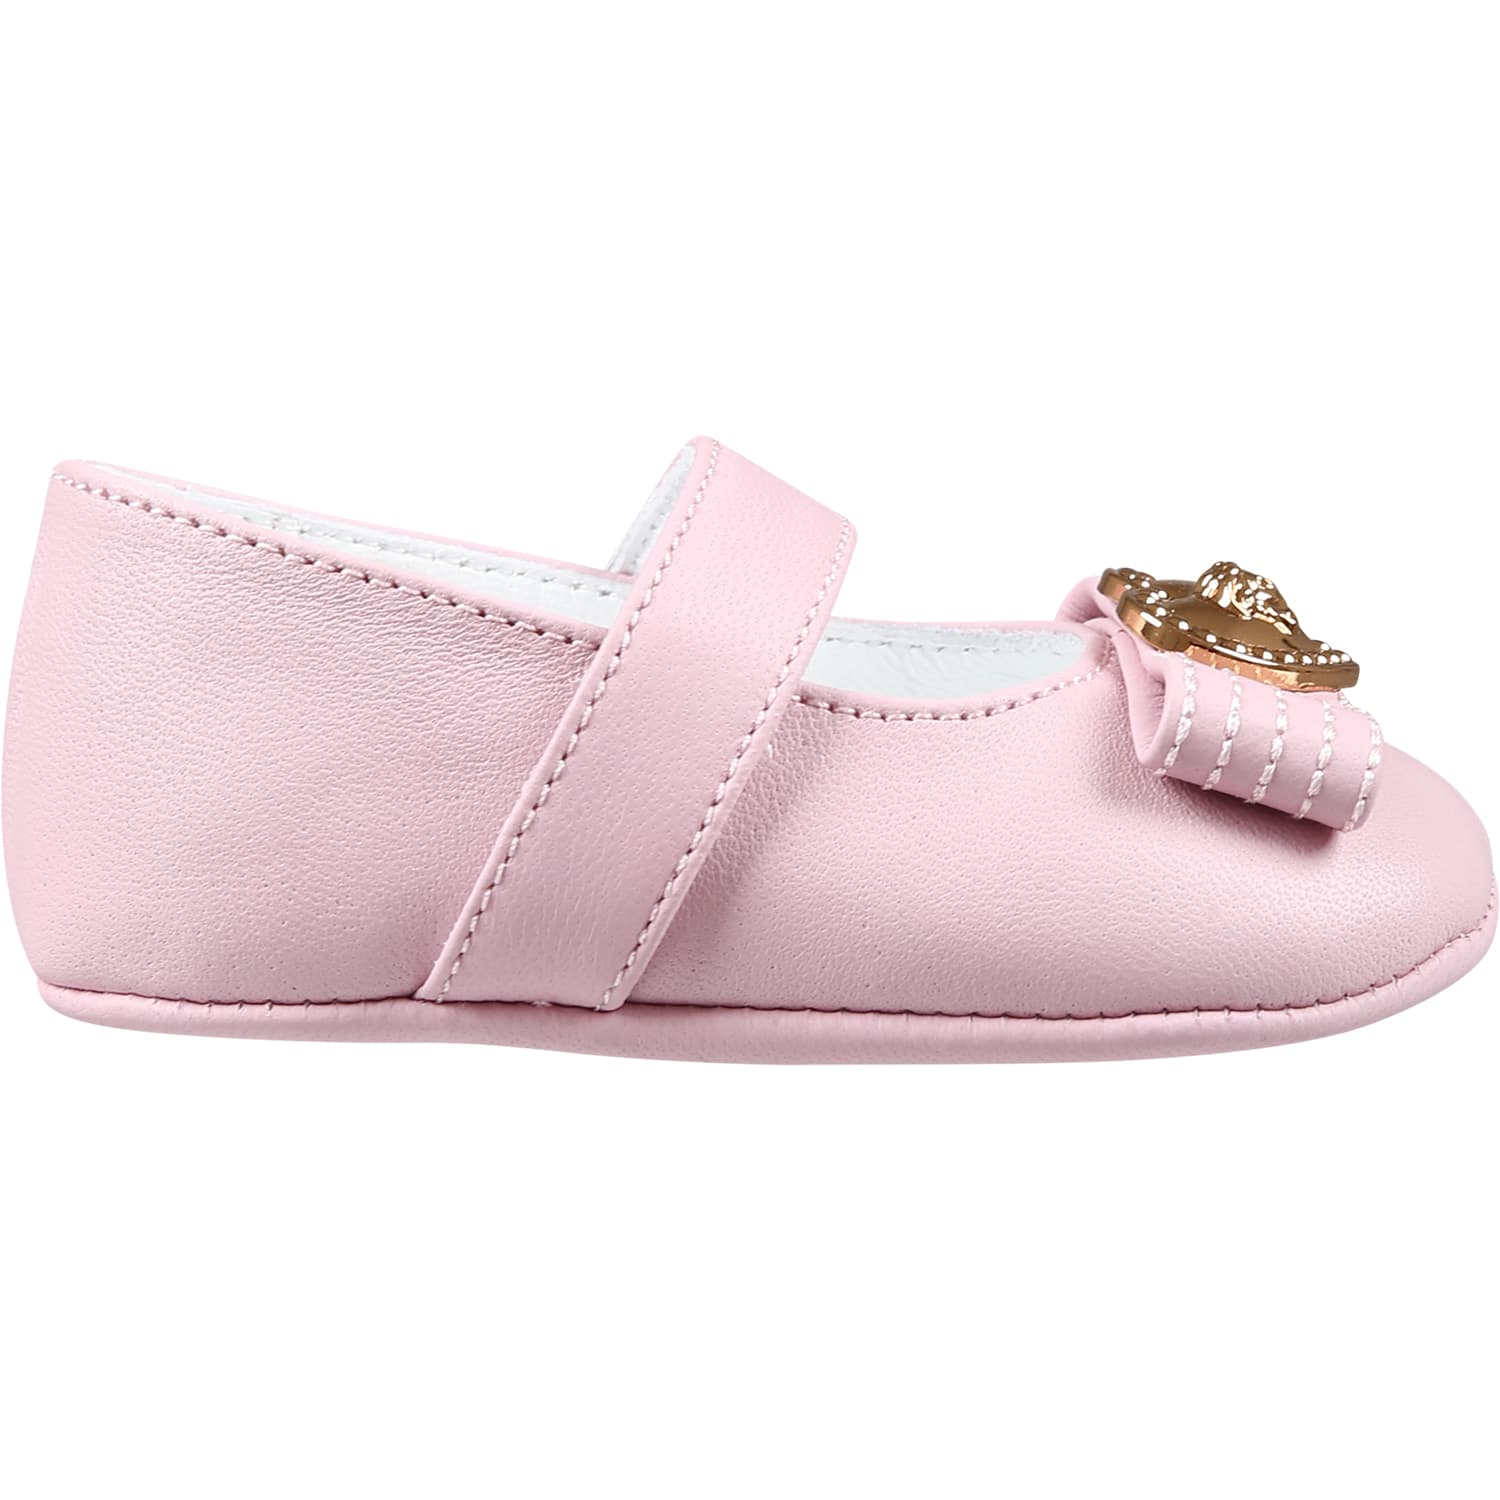 Shop Versace Pink Ballet Flats For Baby Girl With Heart And Medusa